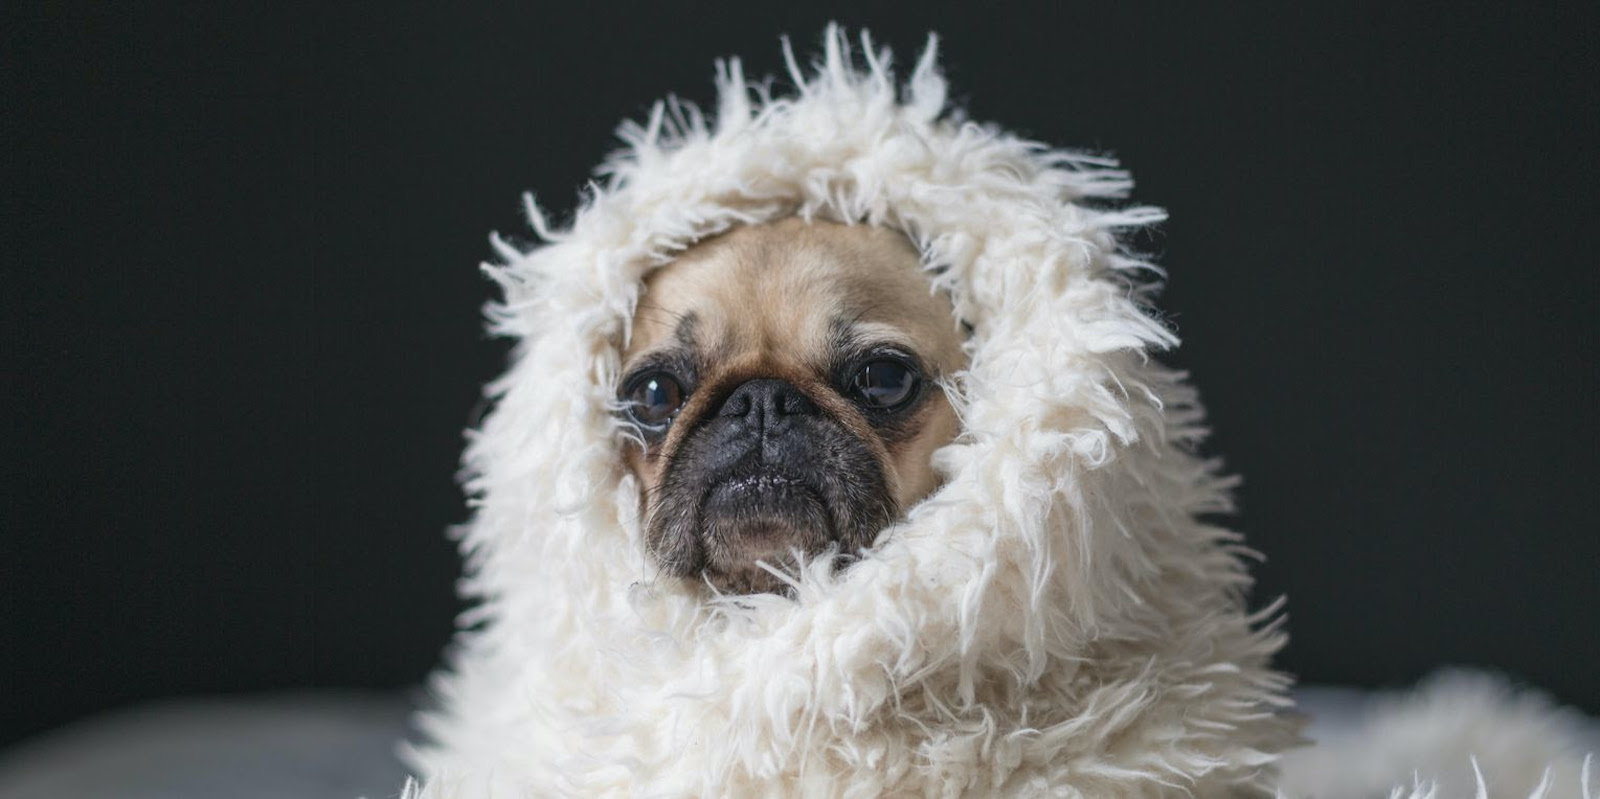 A photograph of a pug dog wrapped in a fuzzy blanket, looking miserable.